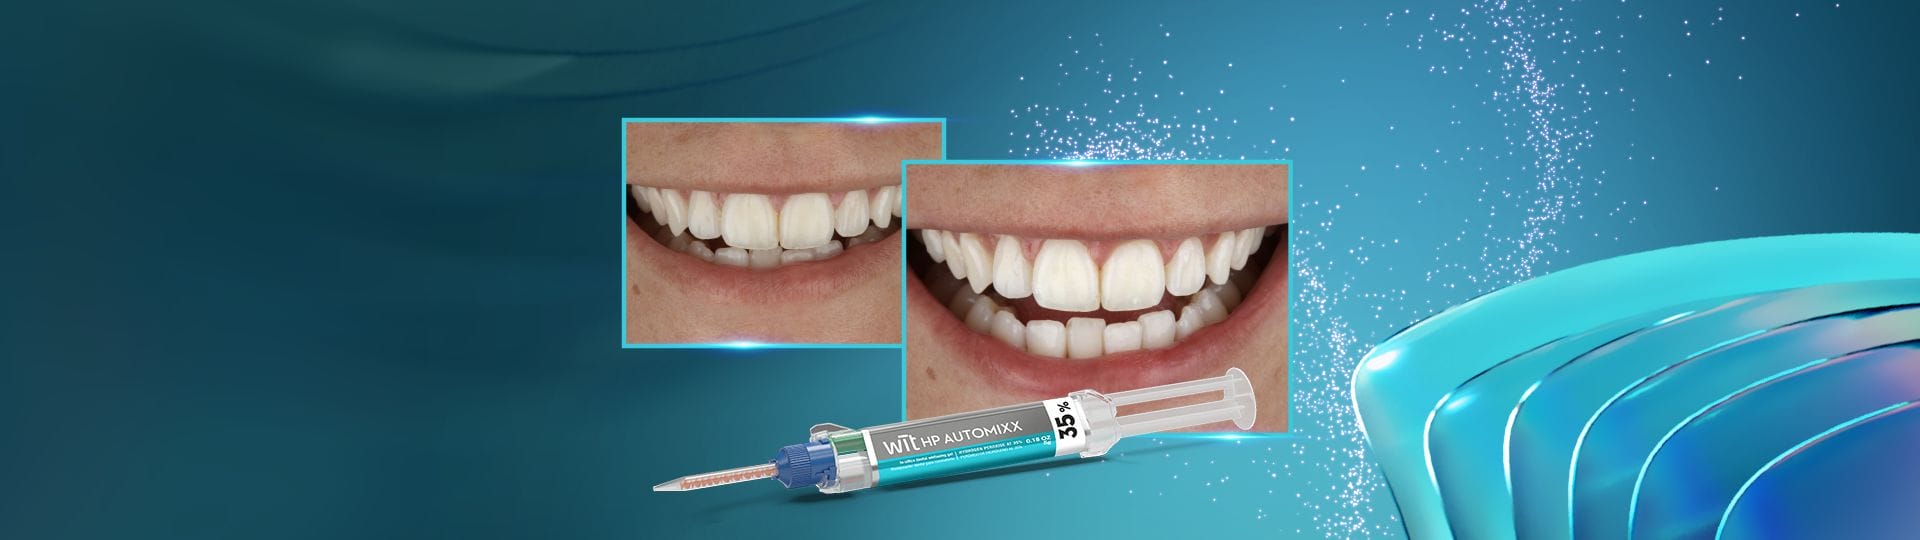 Tooth whitening in the office: a fast and effective alternative for immediate whitening